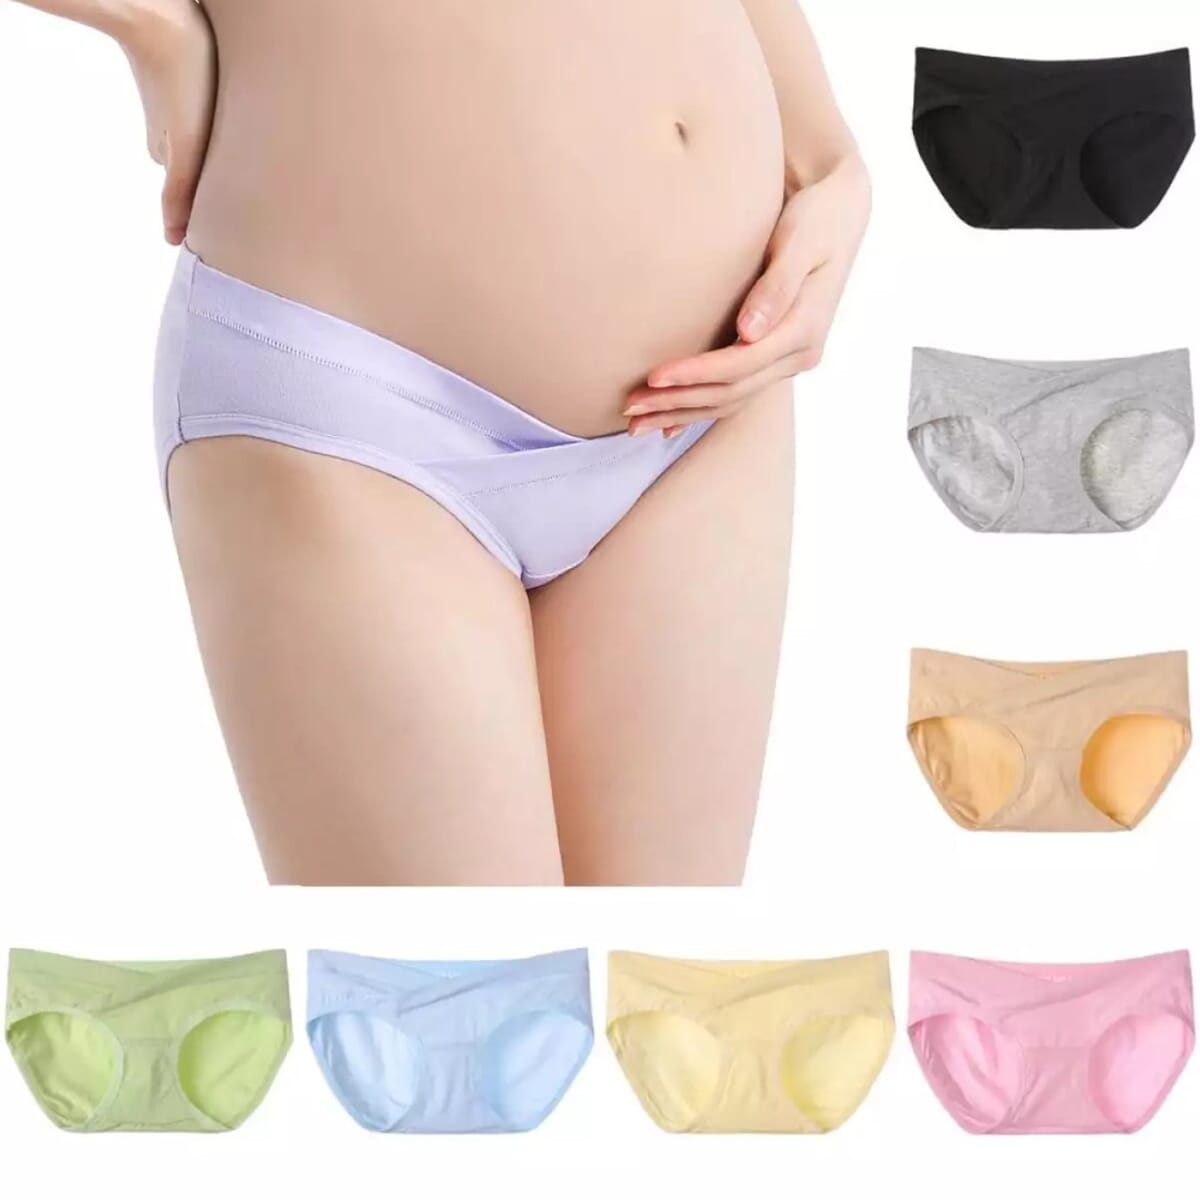 Page 5 - Buy Nursing Maternity Bras Online on Ubuy Nepal at Best Prices